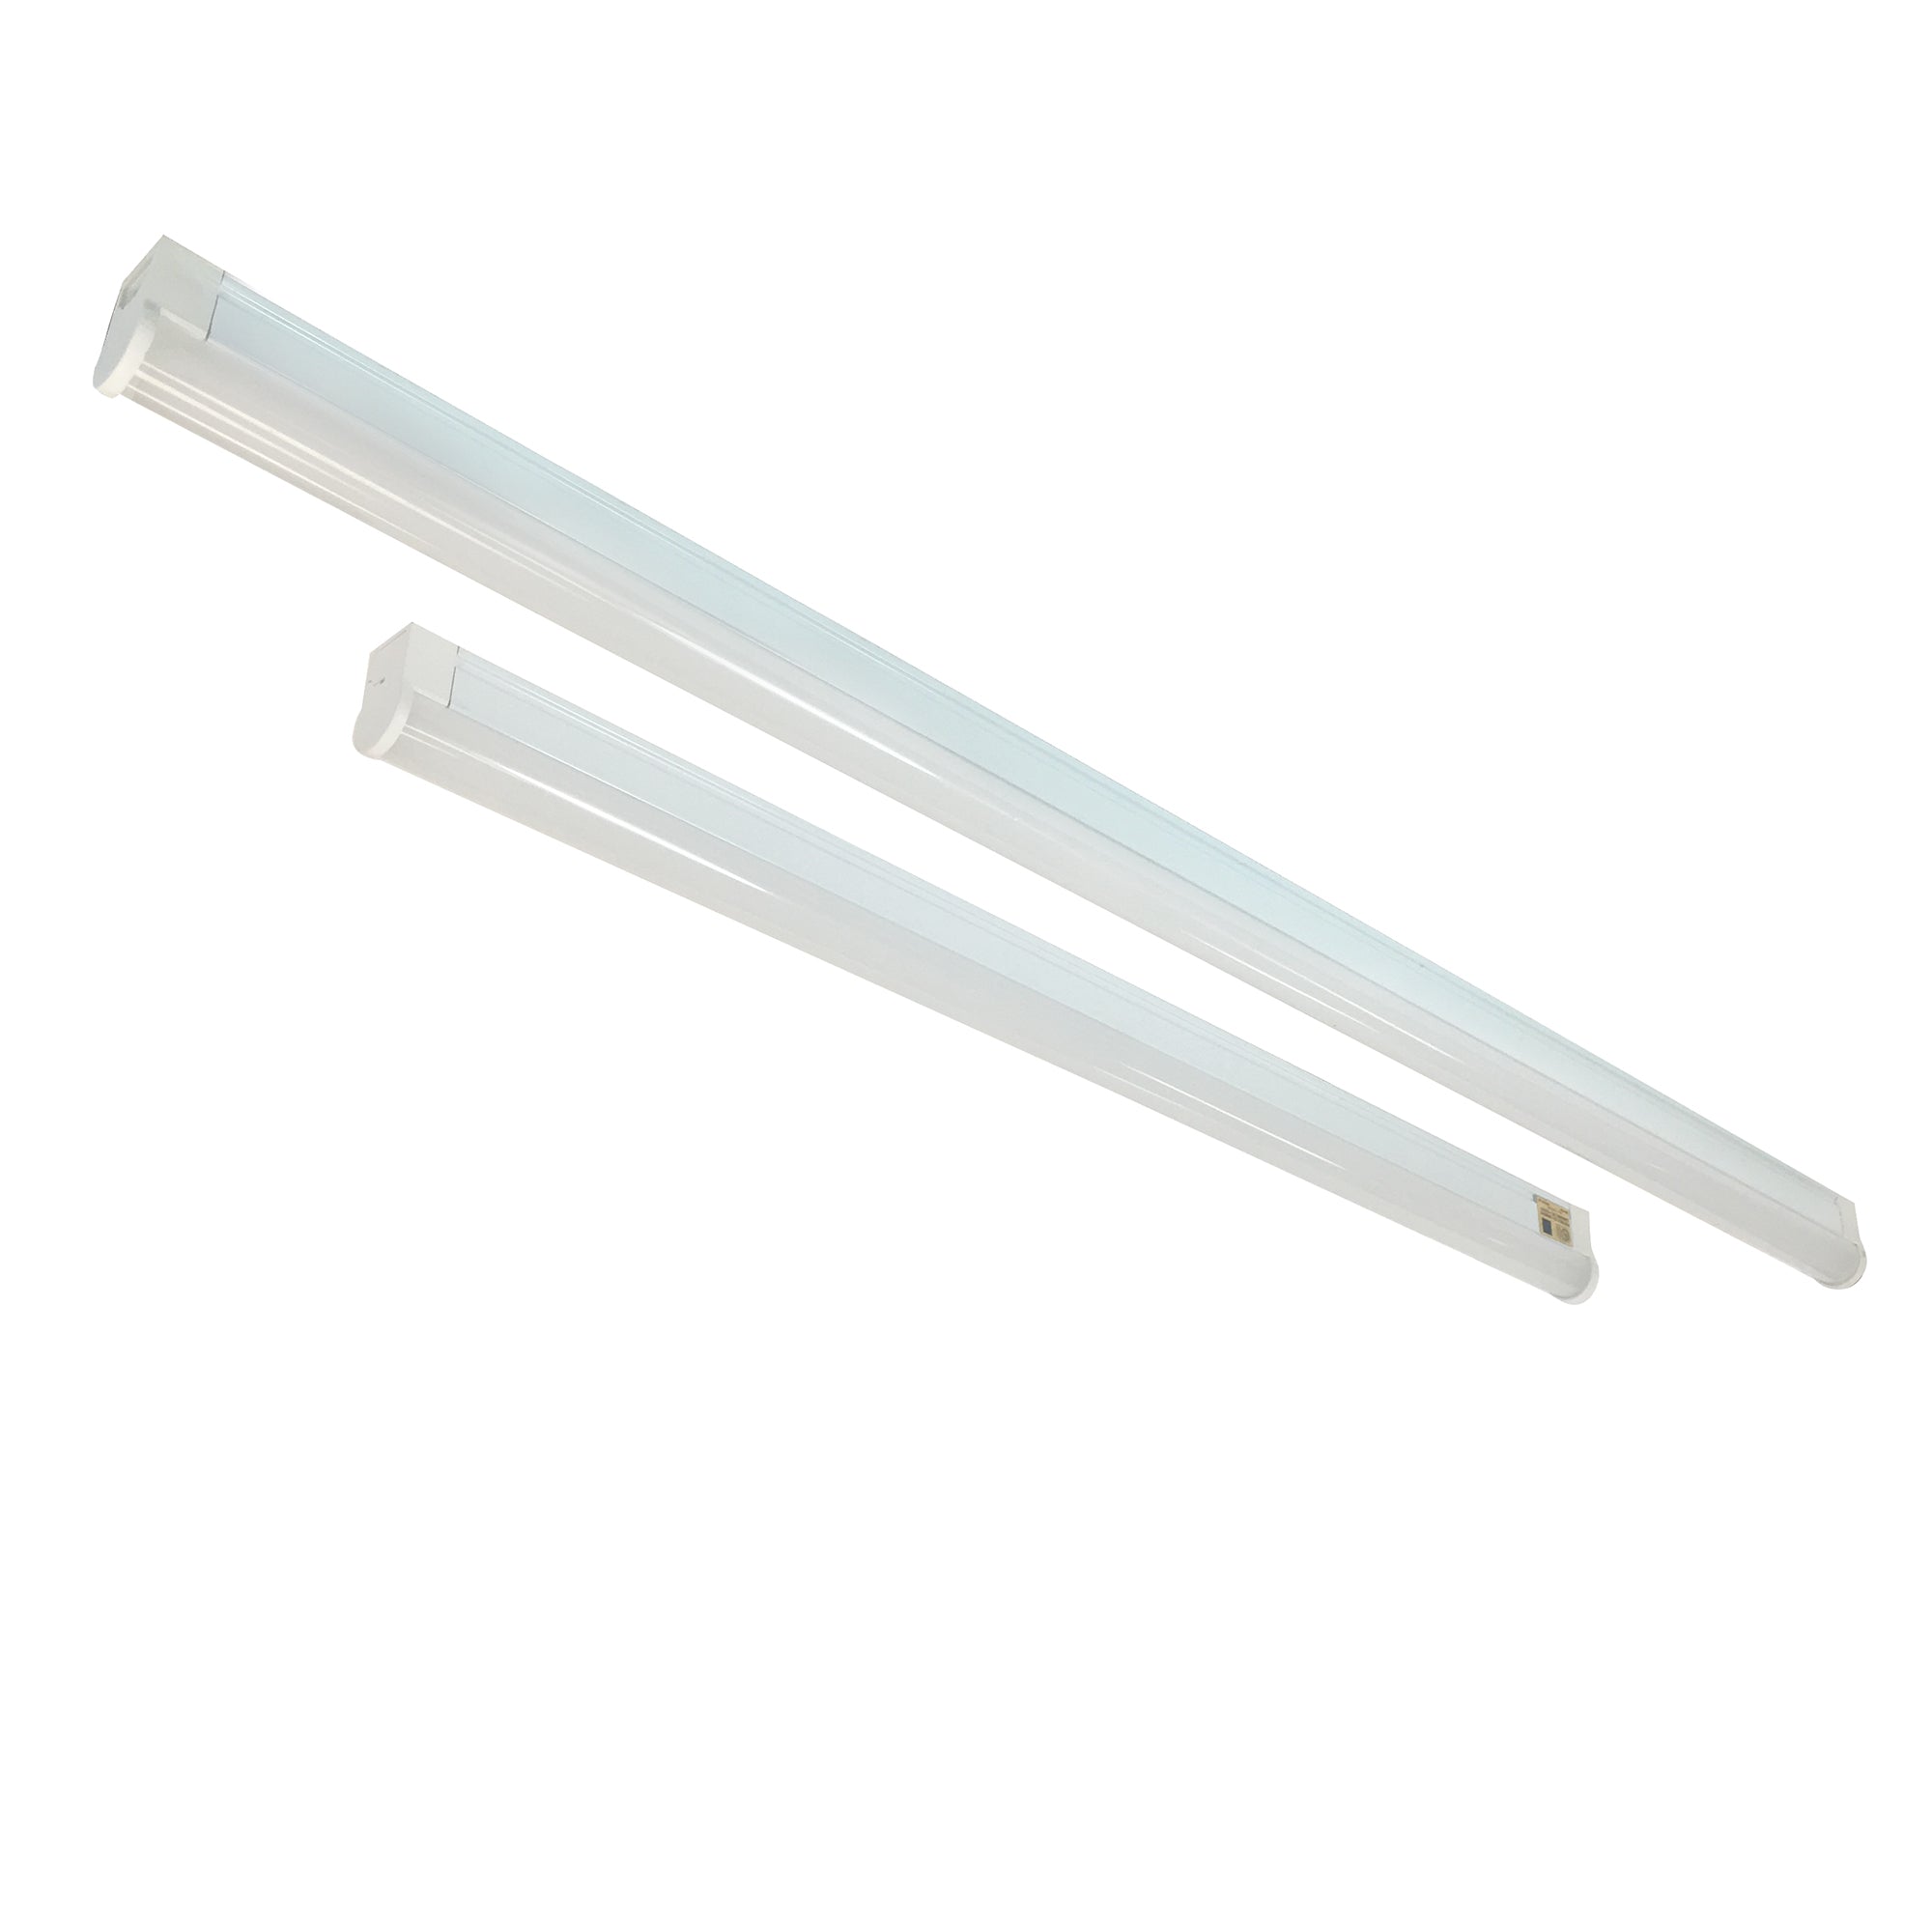 Nora Lighting NULS-LED2140W - Accent / Undercabinet - 21 Inch LED Linear Undercabinet, 4000K, White